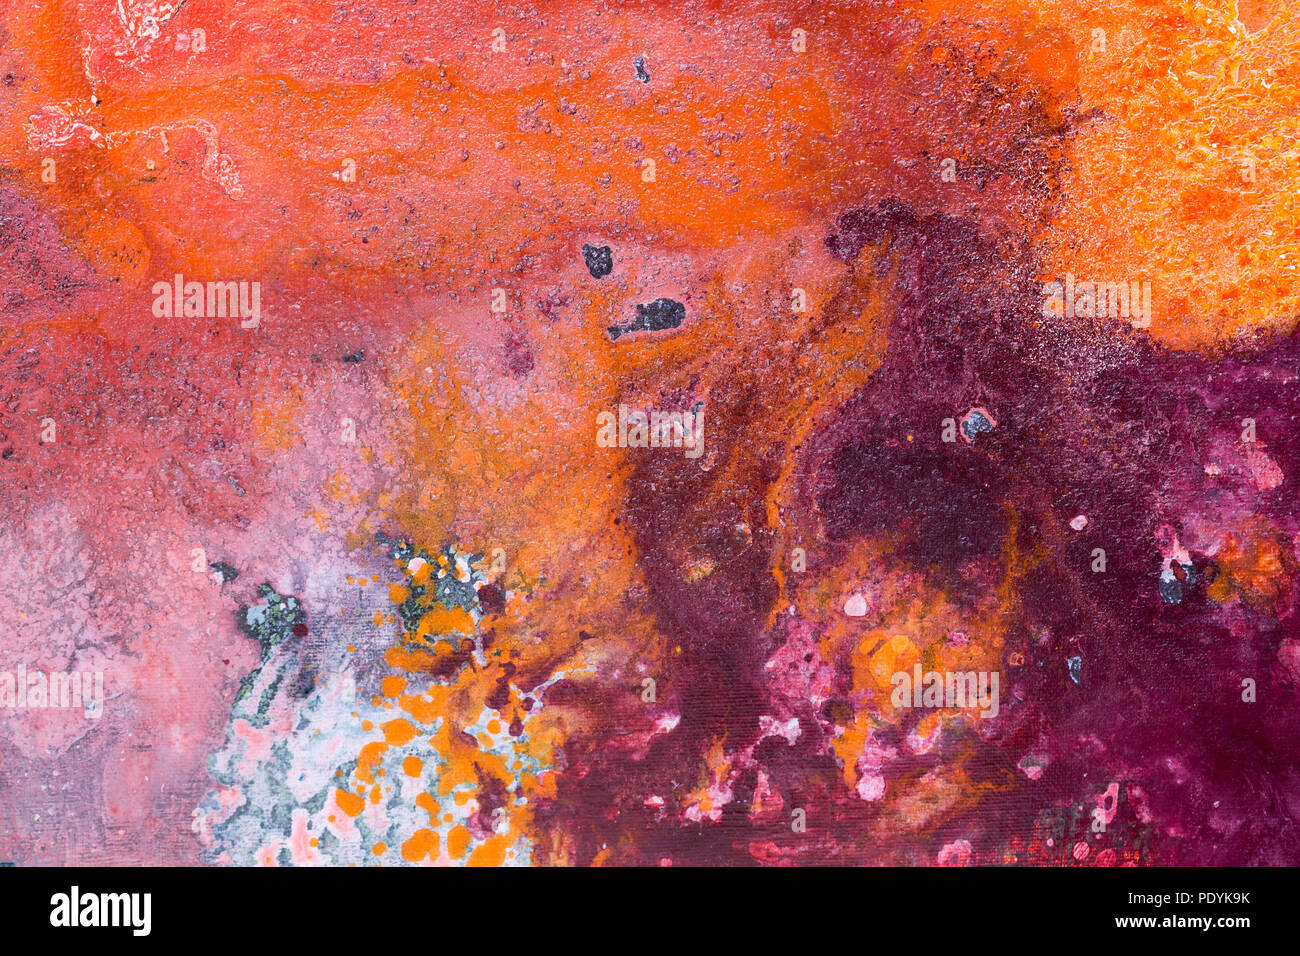 Abstract Painting Color Texture Bright Artistic Background In R Stock Photo Alamy